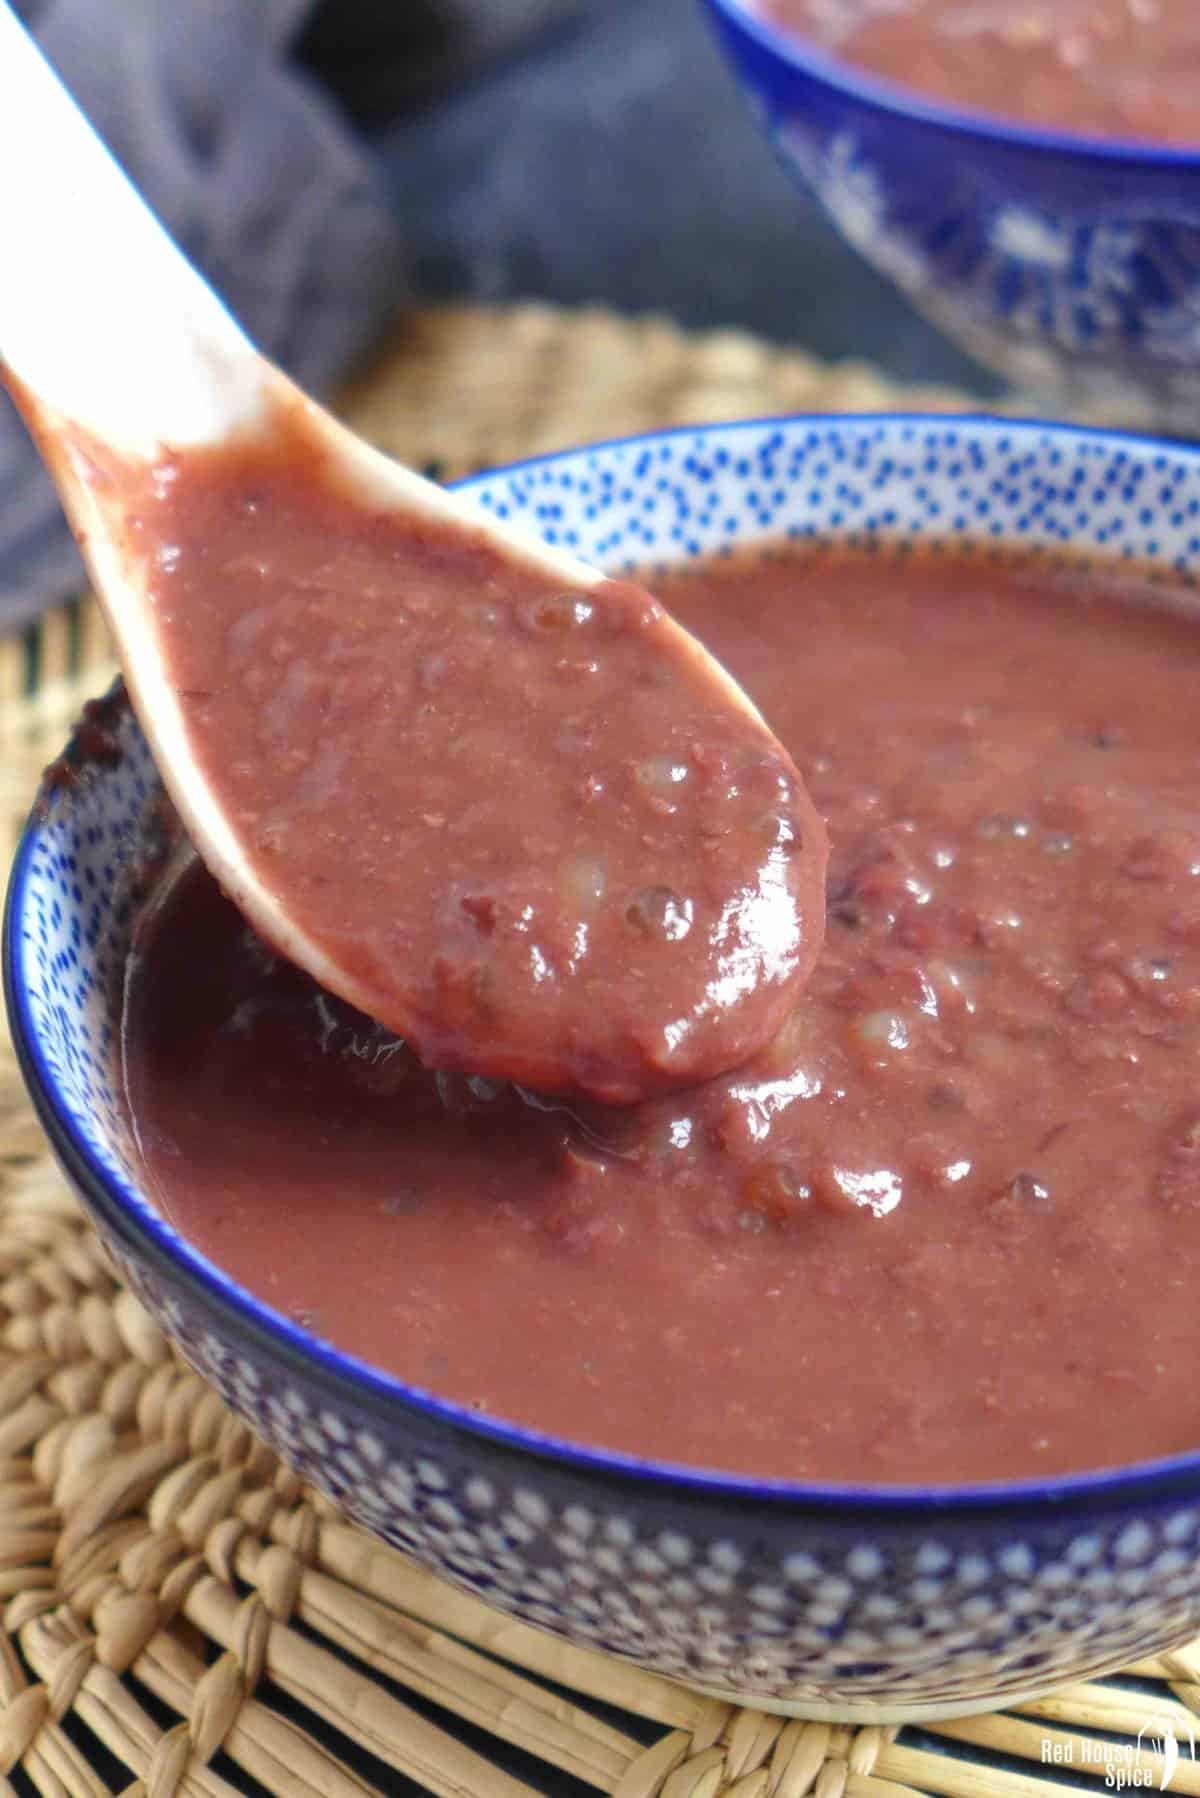 Spooning sweet red bean soup.